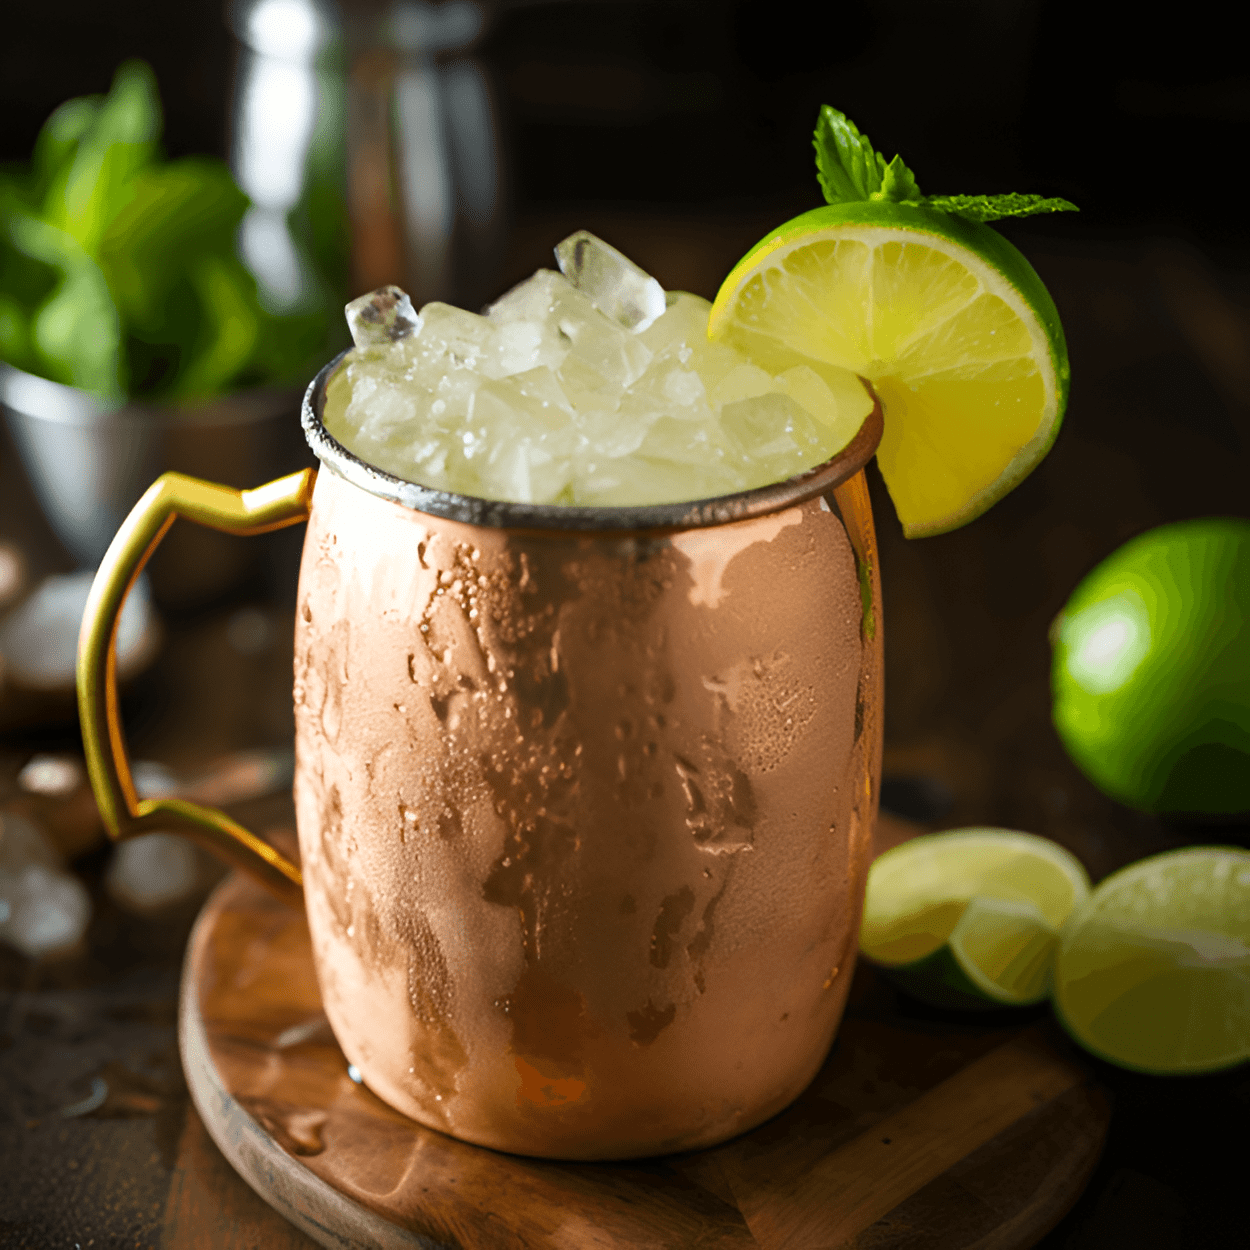 Tropical Mule Cocktail Recipe - The Tropical Mule is a refreshing, sweet and sour cocktail. It has the tanginess of lime, the sweetness of pineapple, and the kick of ginger from the ginger beer. It's a well-balanced cocktail that's not too sweet nor too sour.